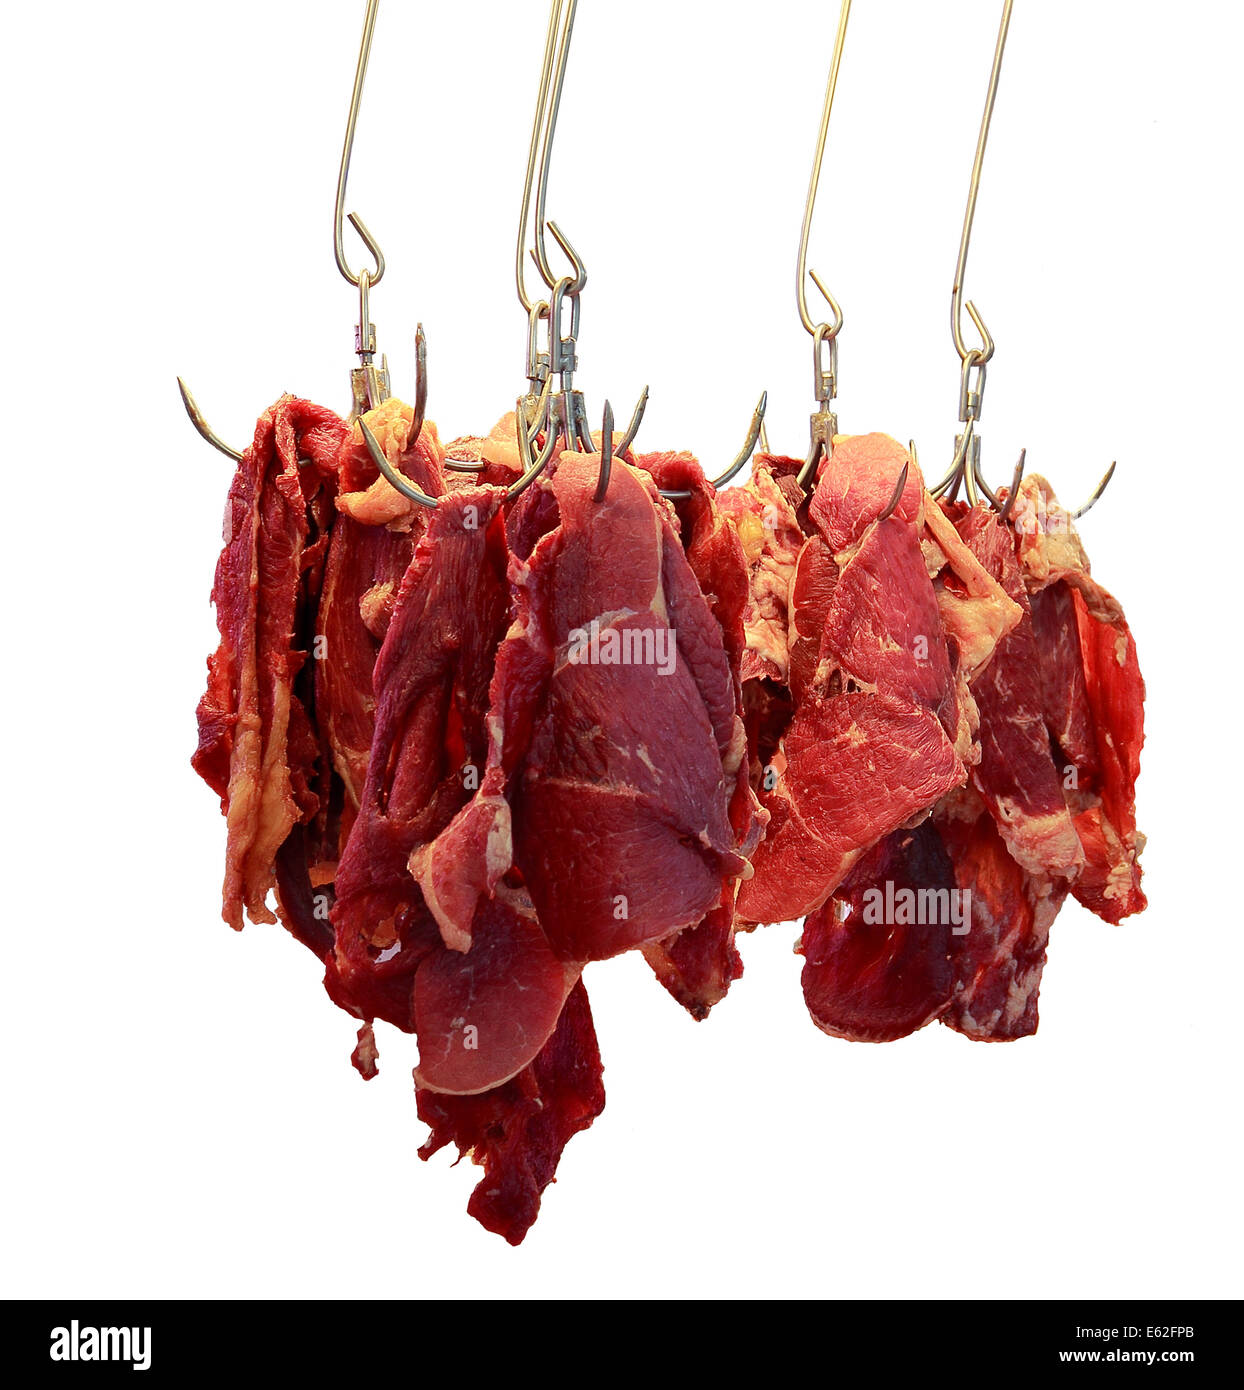 Piece of Beef hang with hook. fresh meat in market.on isolate white background. Stock Photo